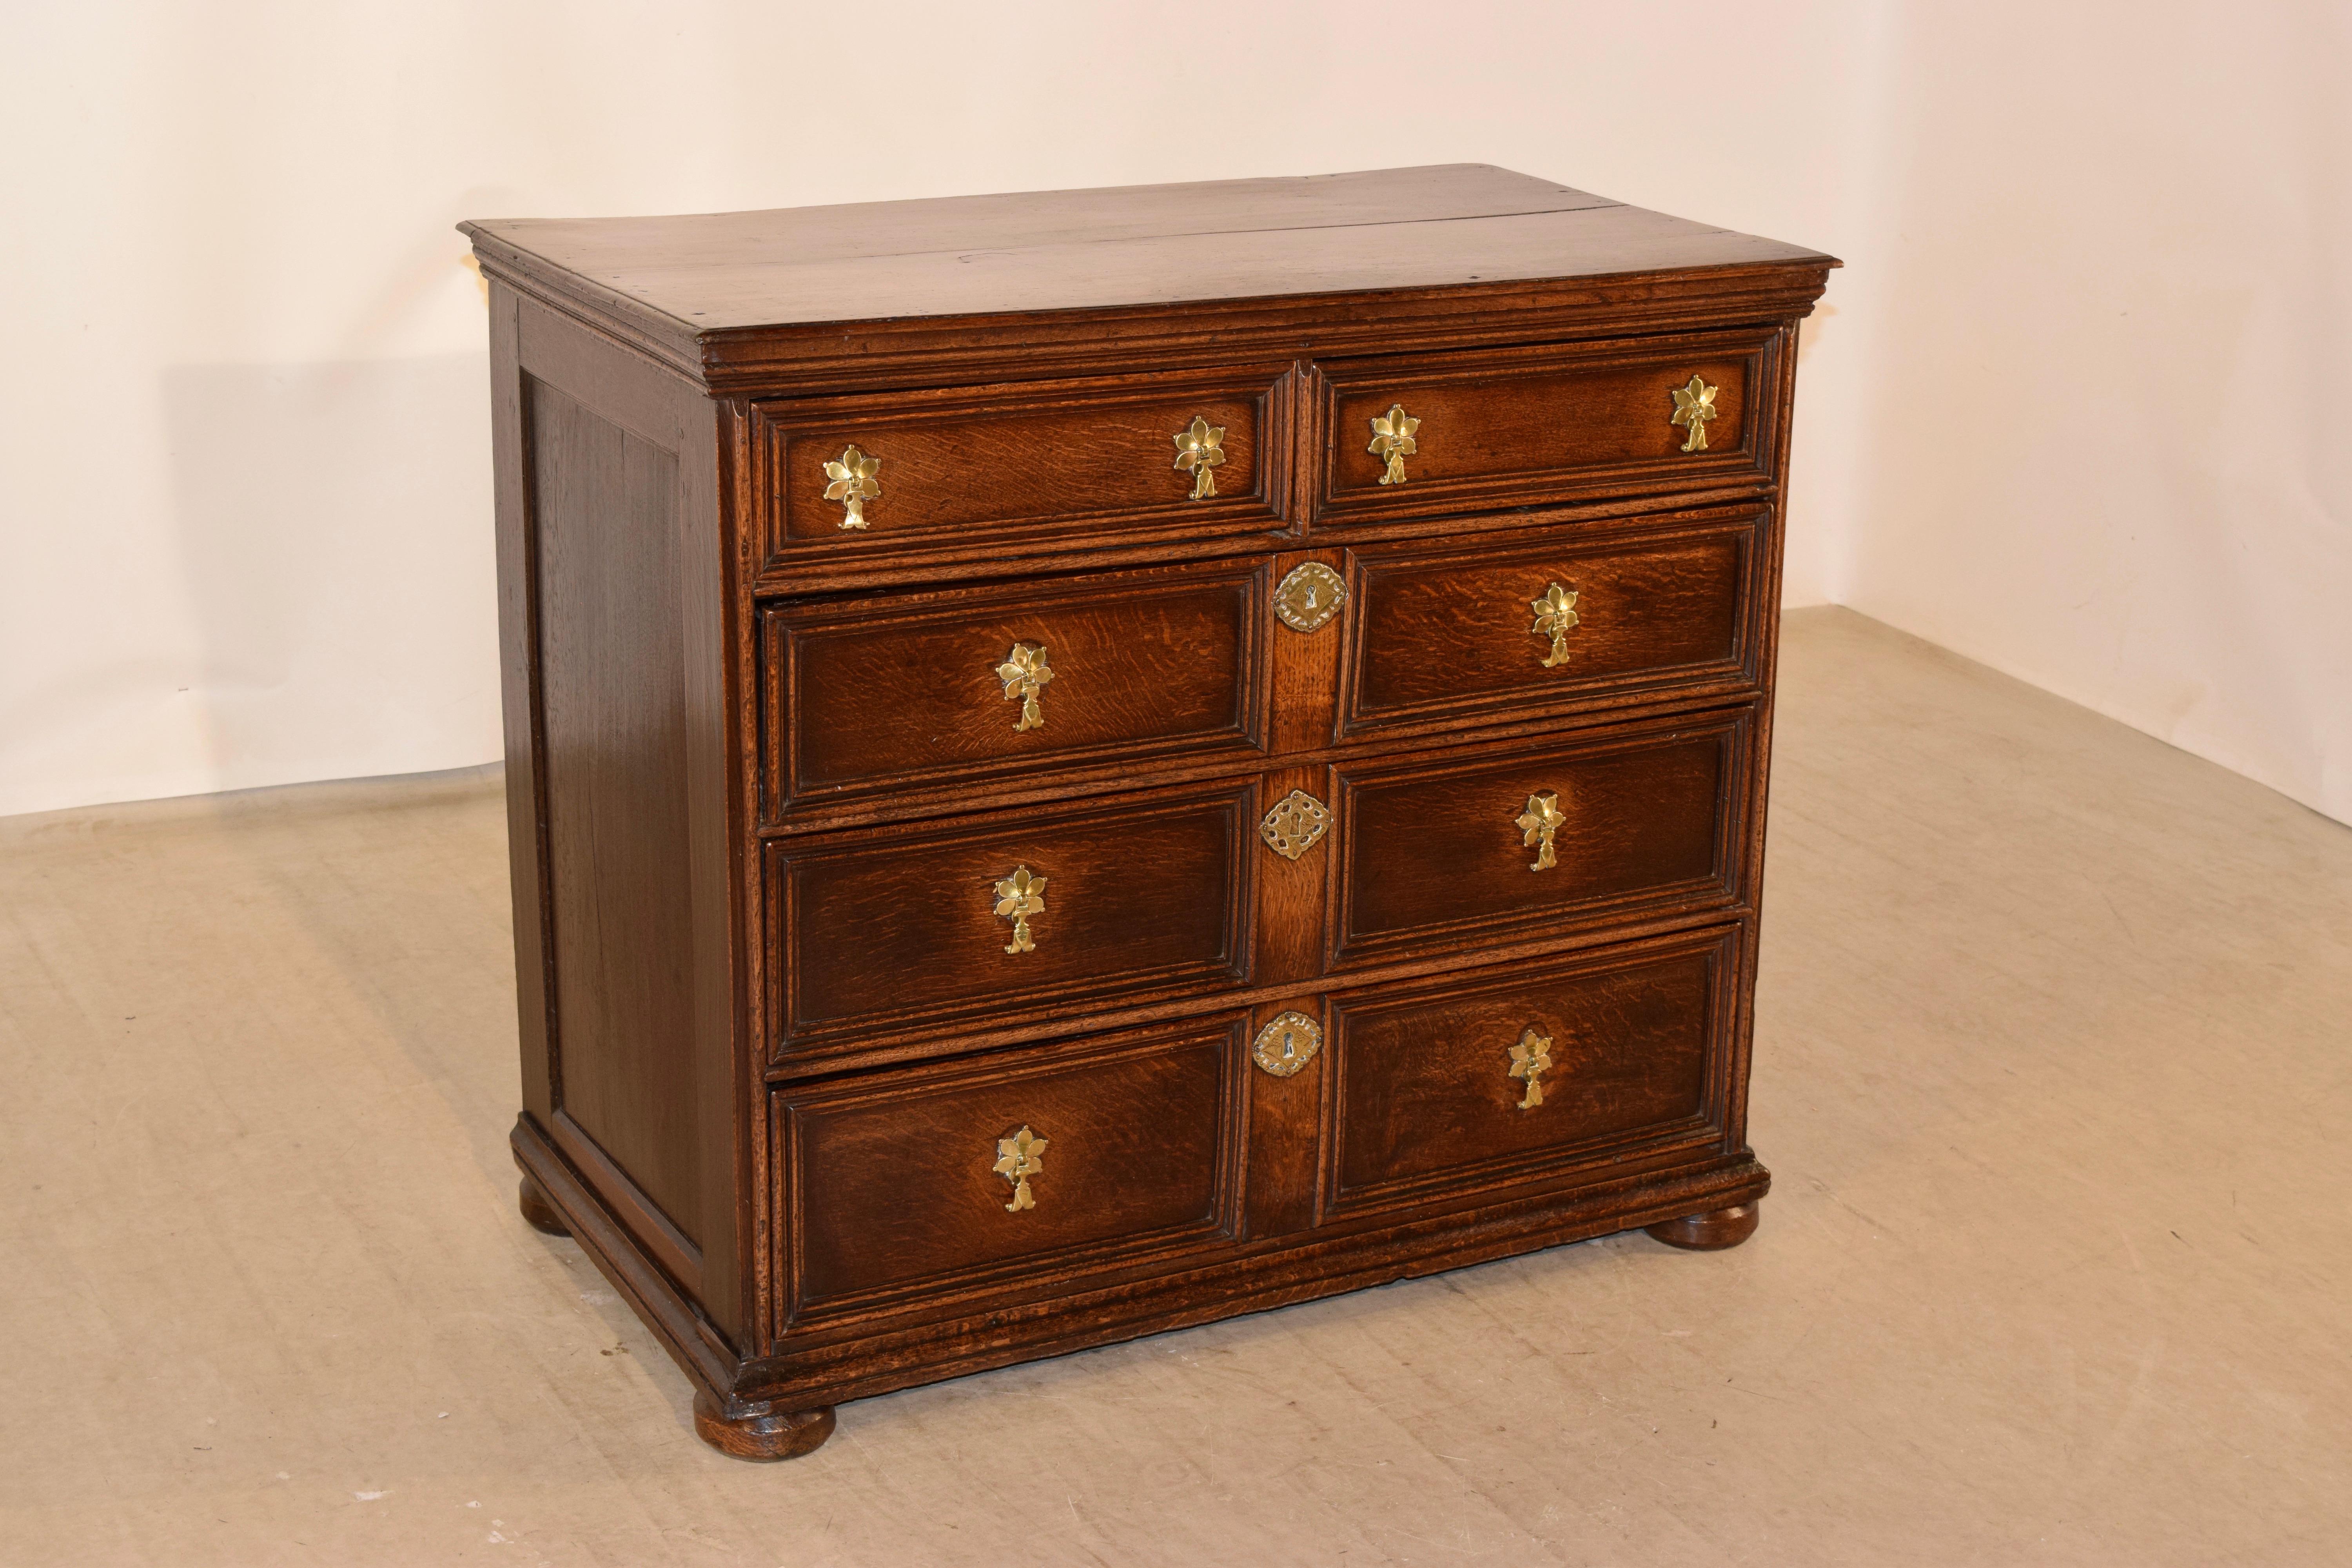 Oak paneled chest of drawers from England, circa 1740-1760. The top has a beveled edge and molded apron with two over three drawers configuration. All of the drawers are paneled with molding and retain what appears to be original hardware. The case